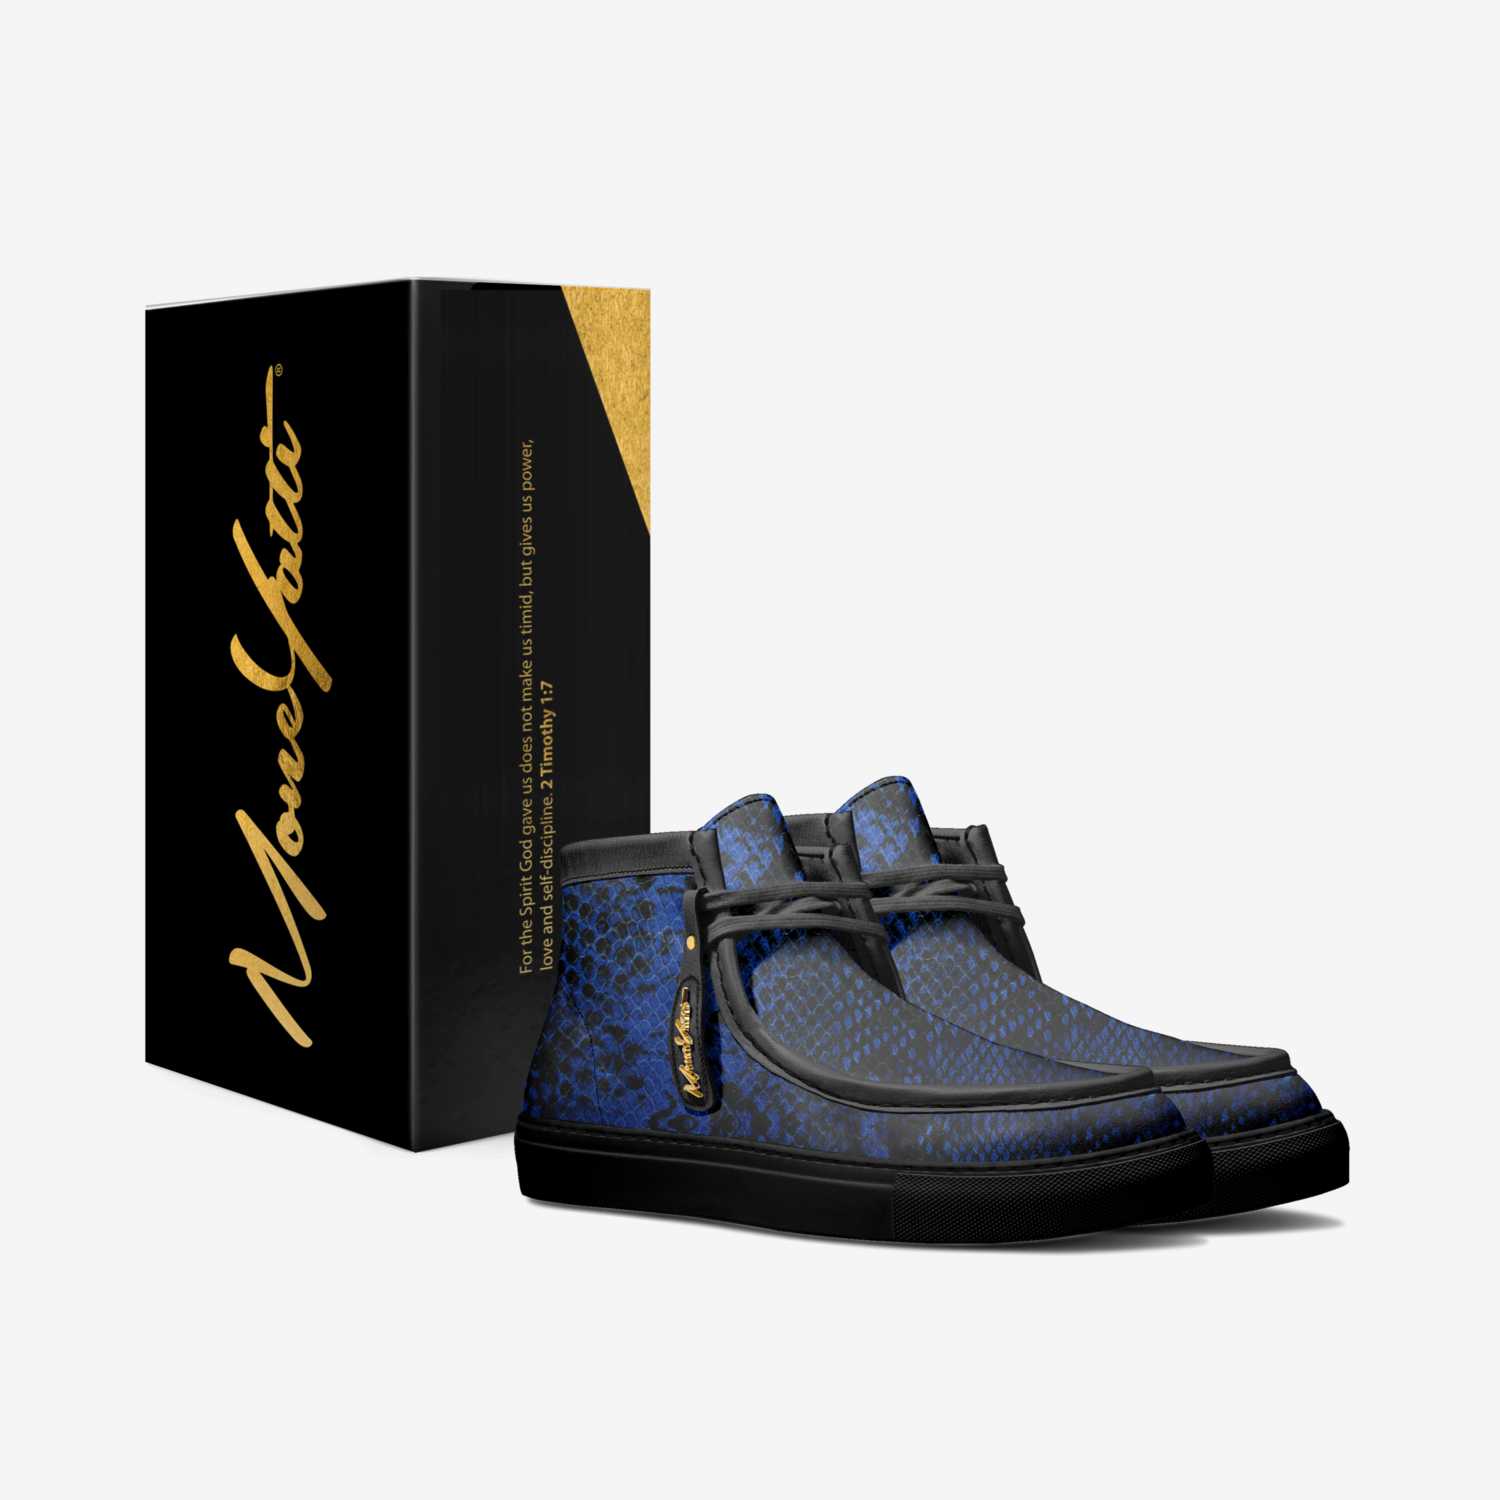 LUX 014 custom made in Italy shoes by Moneyatti Brand | Box view